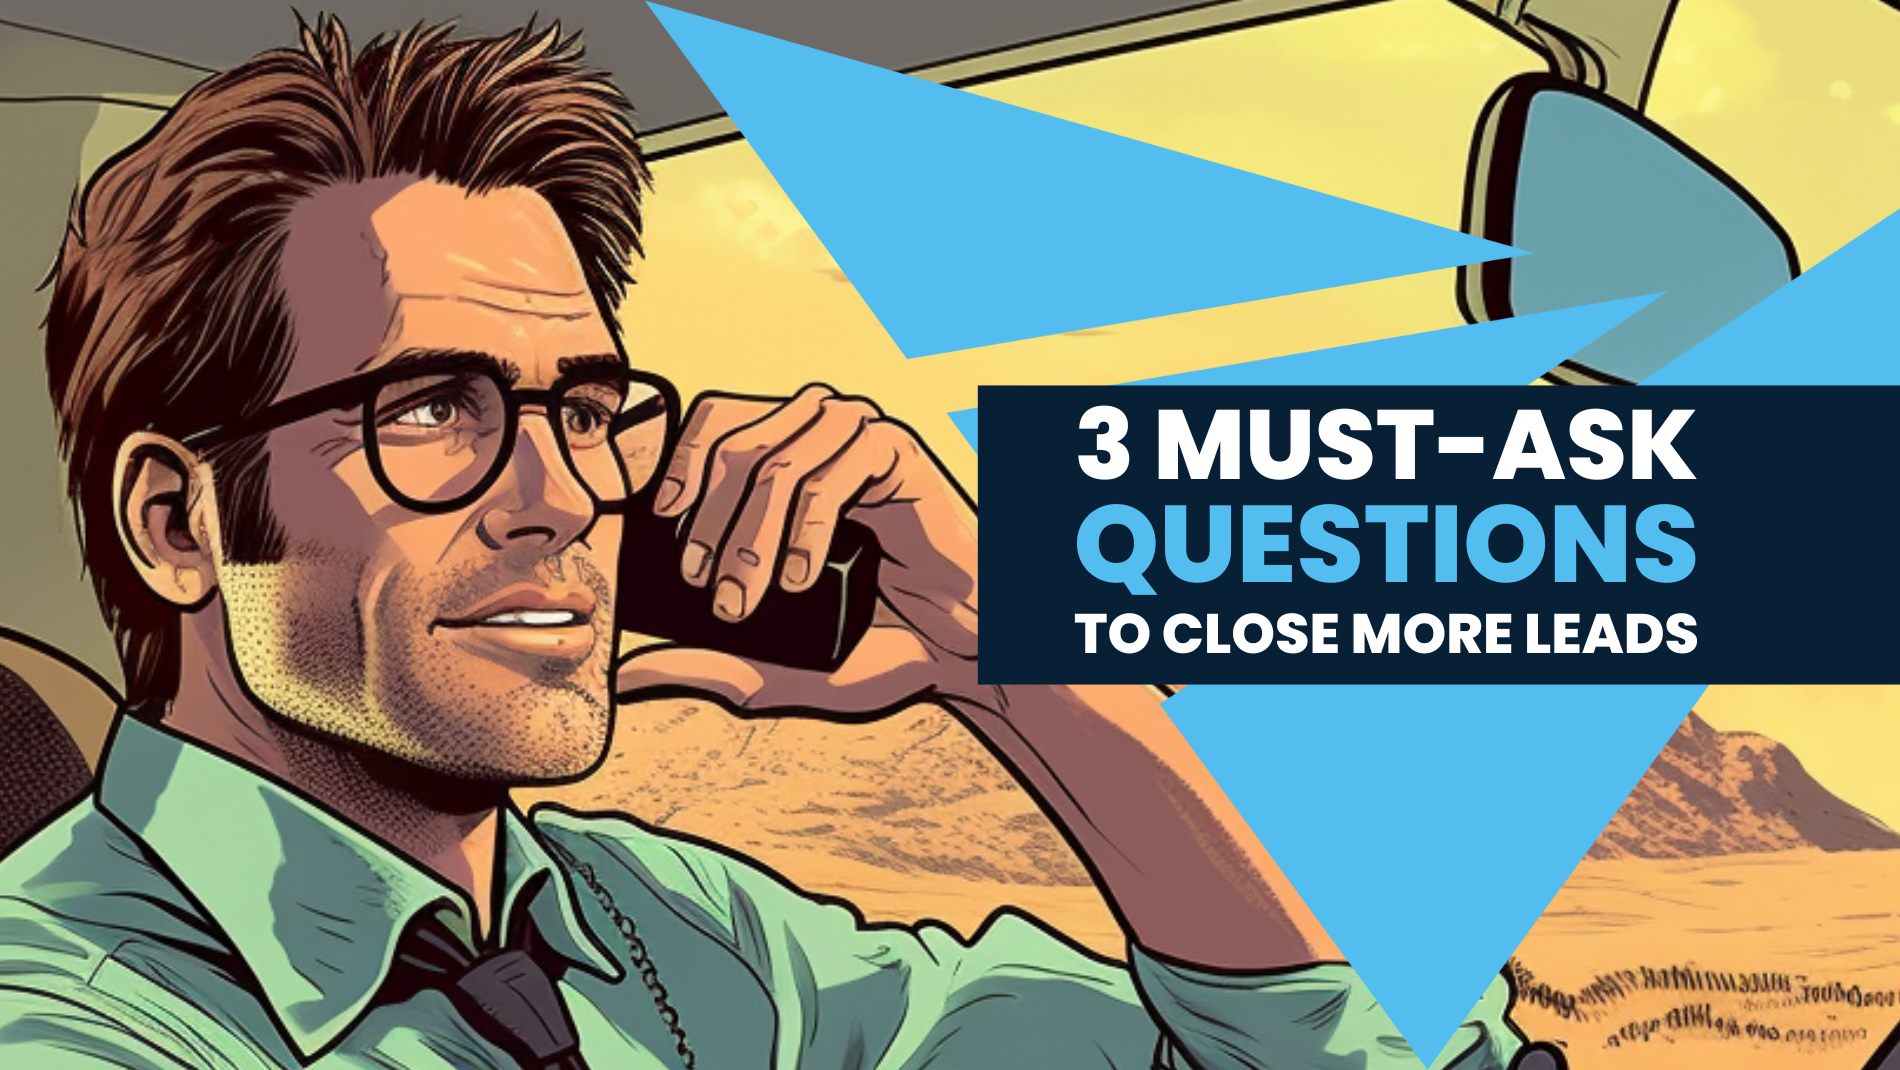 3 Must-Ask Questions To Close More Leads